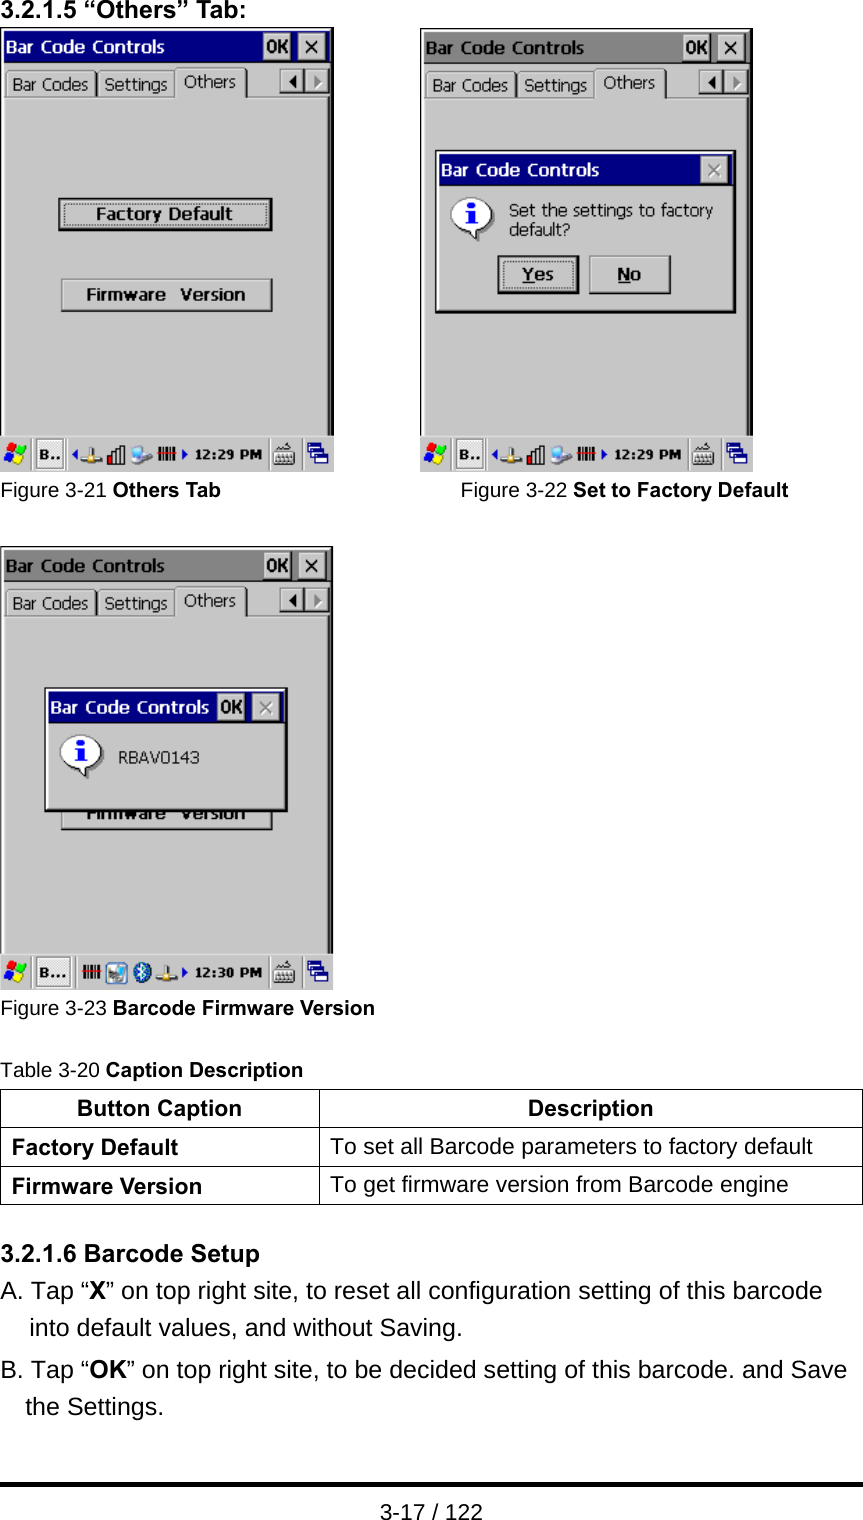  3-17 / 122 3.2.1.5 “Others” Tab:          Figure 3-21 Others Tab                       Figure 3-22 Set to Factory Default   Figure 3-23 Barcode Firmware Version  Table 3-20 Caption Description Button Caption  Description Factory Default  To set all Barcode parameters to factory default Firmware Version  To get firmware version from Barcode engine  3.2.1.6 Barcode Setup A. Tap “X” on top right site, to reset all configuration setting of this barcode   into default values, and without Saving. B. Tap “OK” on top right site, to be decided setting of this barcode. and Save the Settings. 